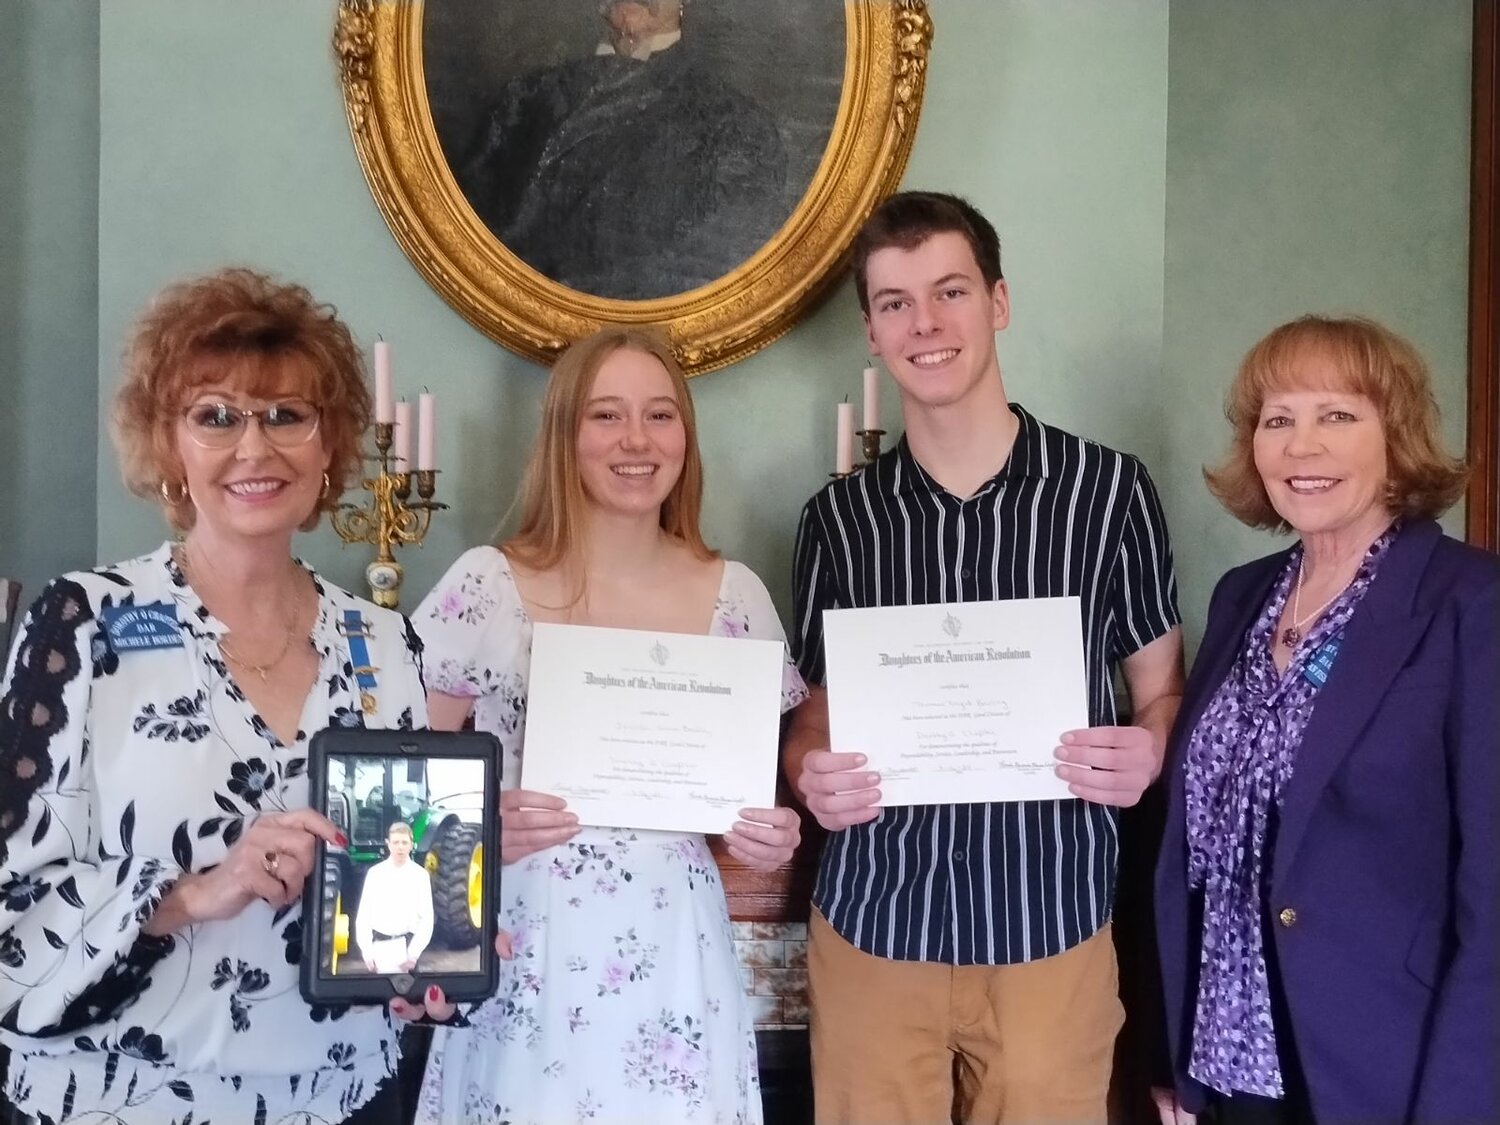 The National Society of the Daughters of the American Revolution’s Dorothy Q Chapter here in Crawfordsville awarded its ‘Good Citizen’ award to Crawfordsville’s Thomas Bowling, Southmont’s Jessica Bradley, and North Montgomery’s Brent Runyan.